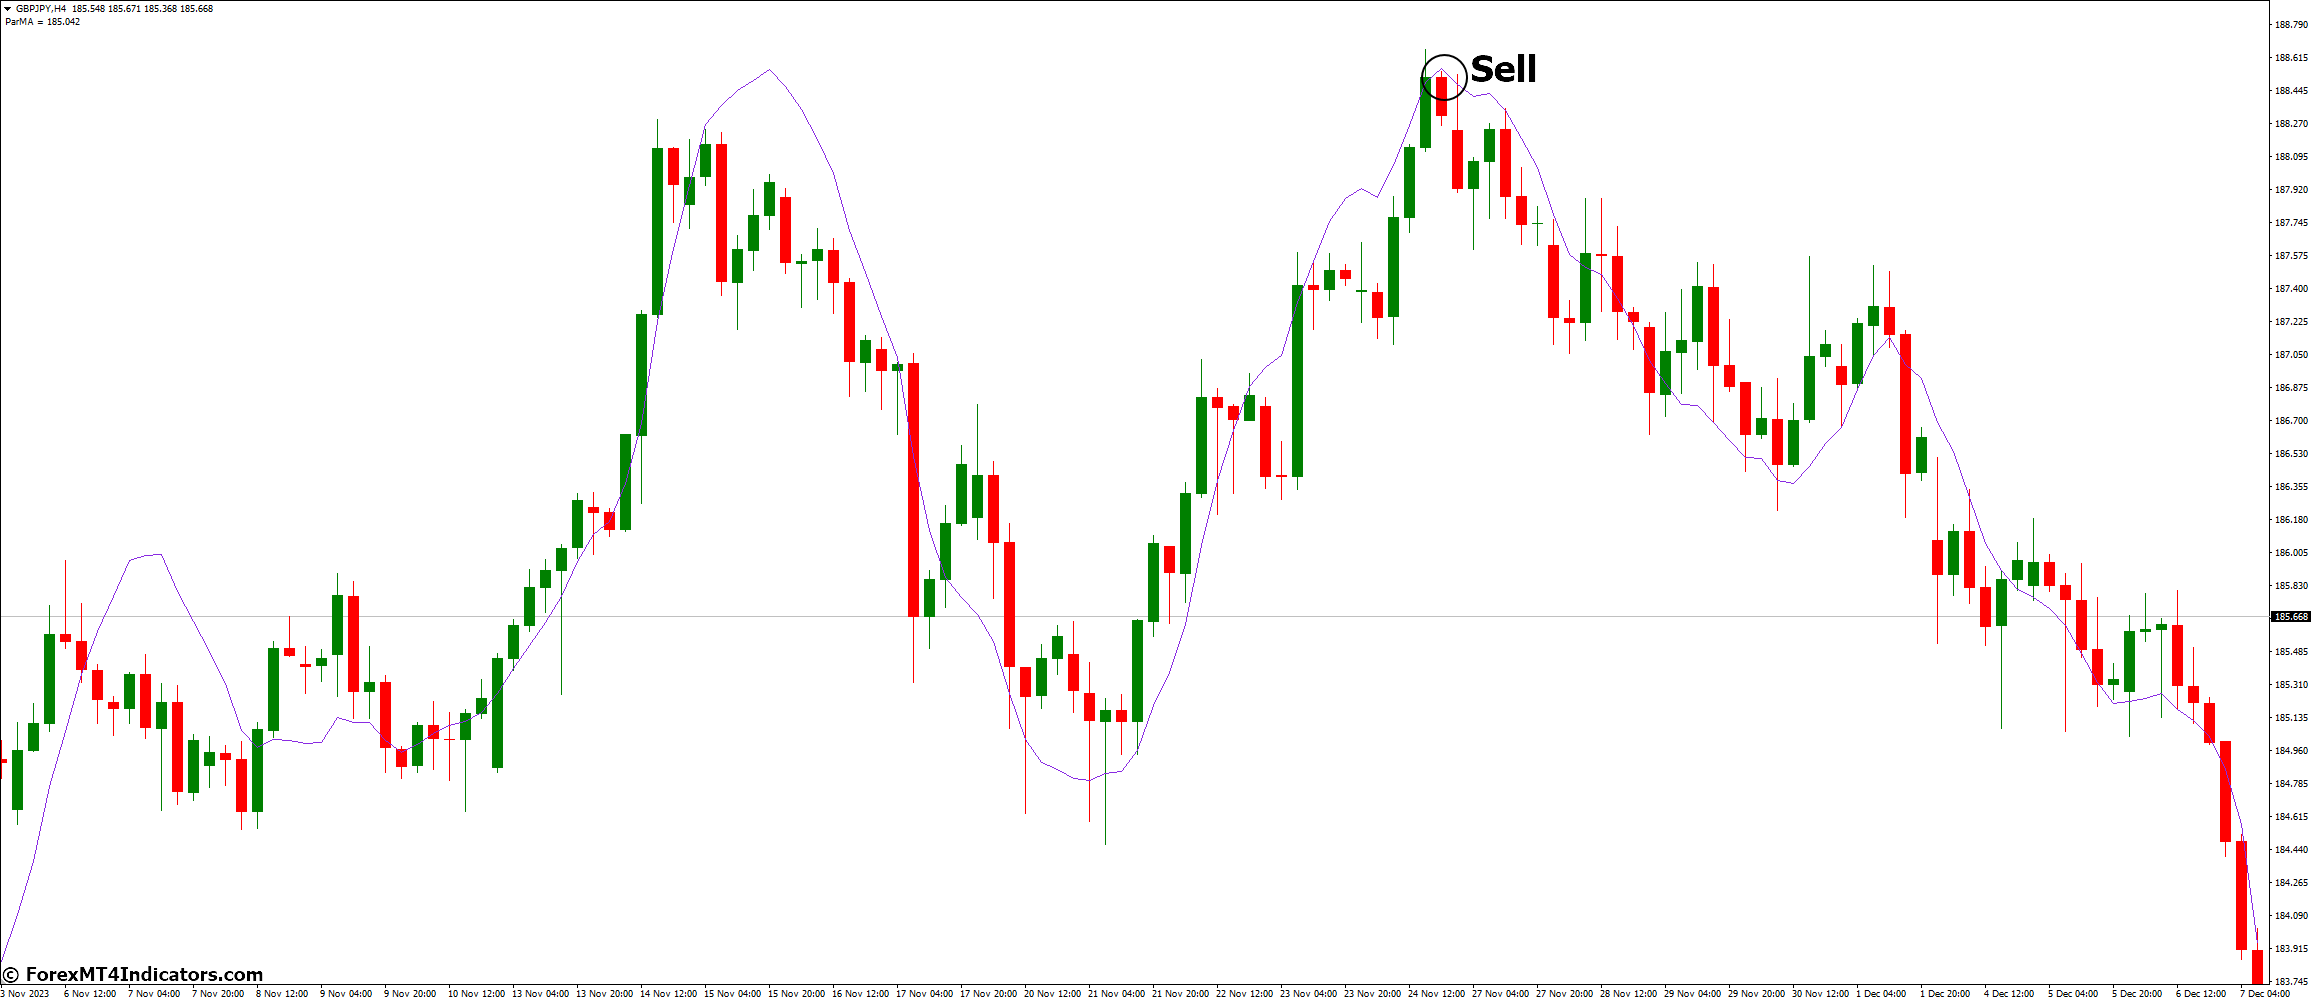 How to Trade with ParMA BB Indicator - Sell Entry